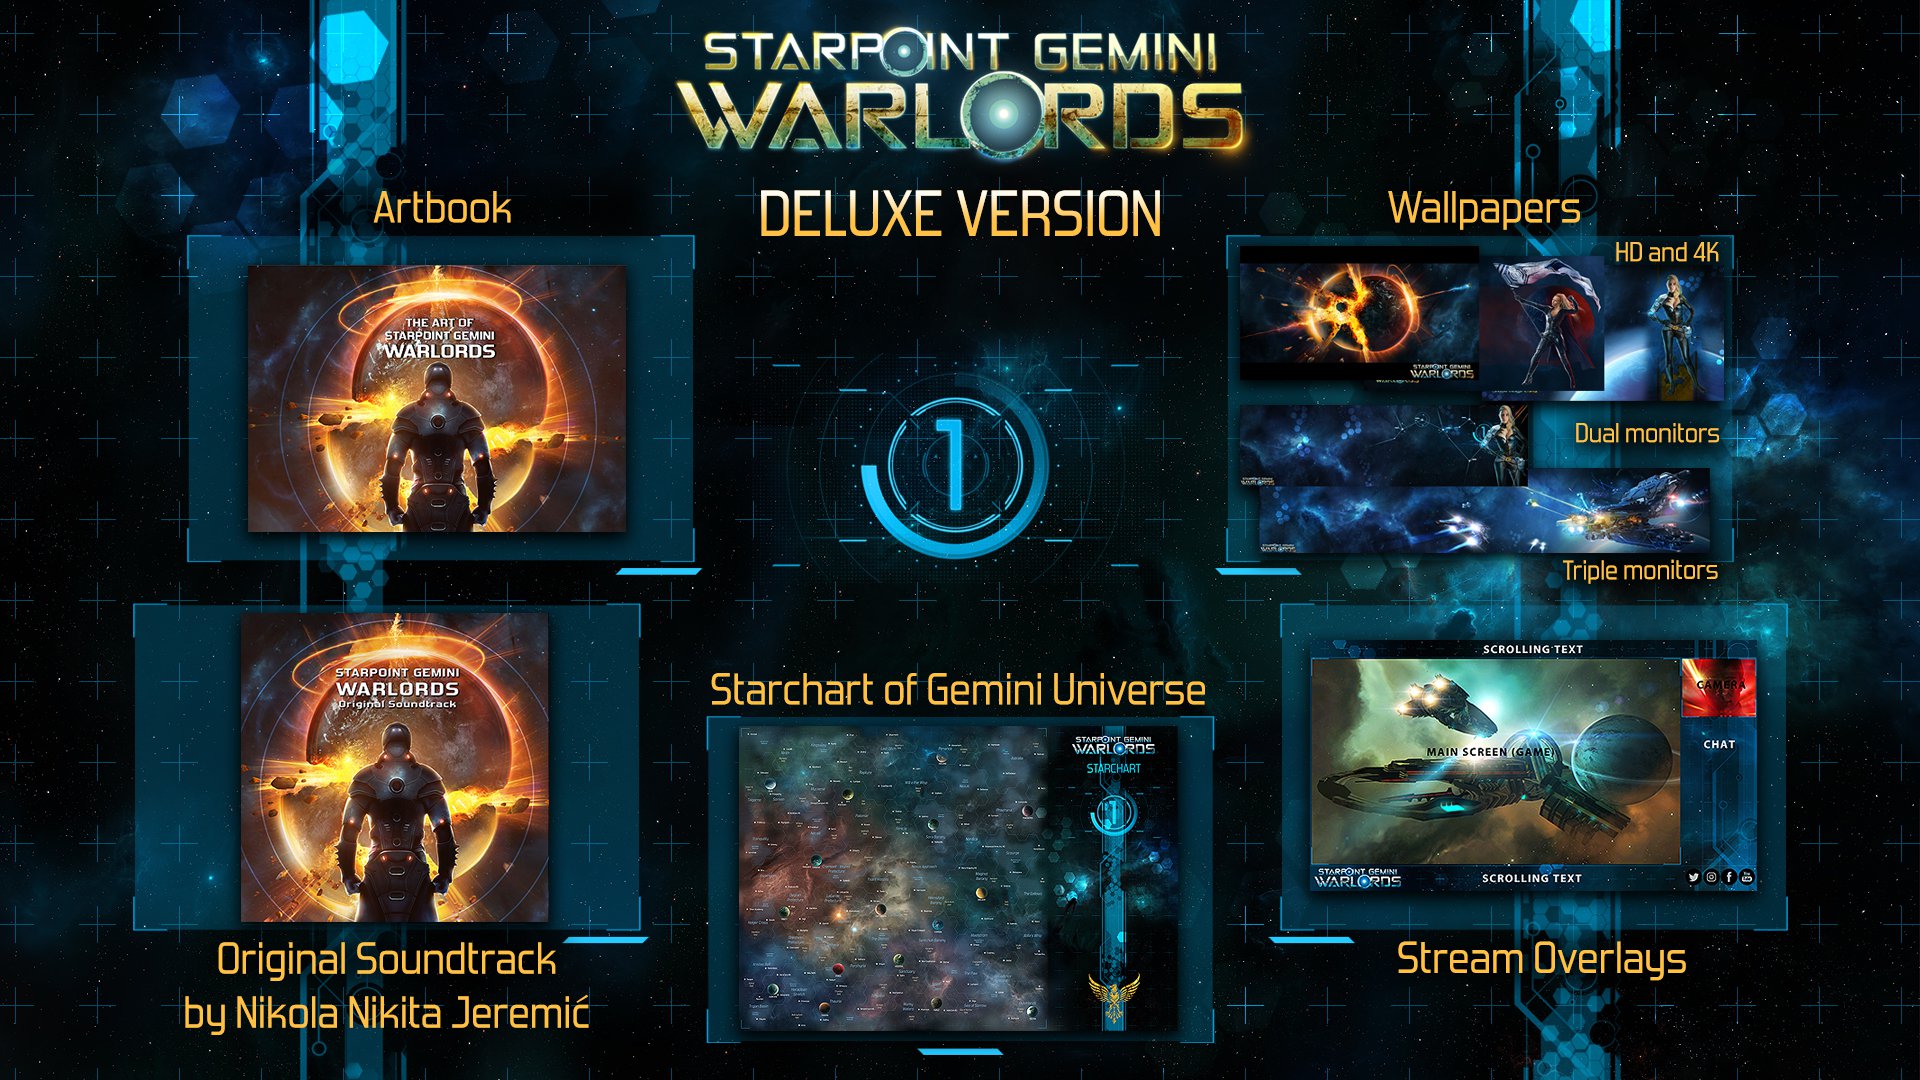 Starpoint Gemini Warlords Upgrade to Digital Deluxe 1